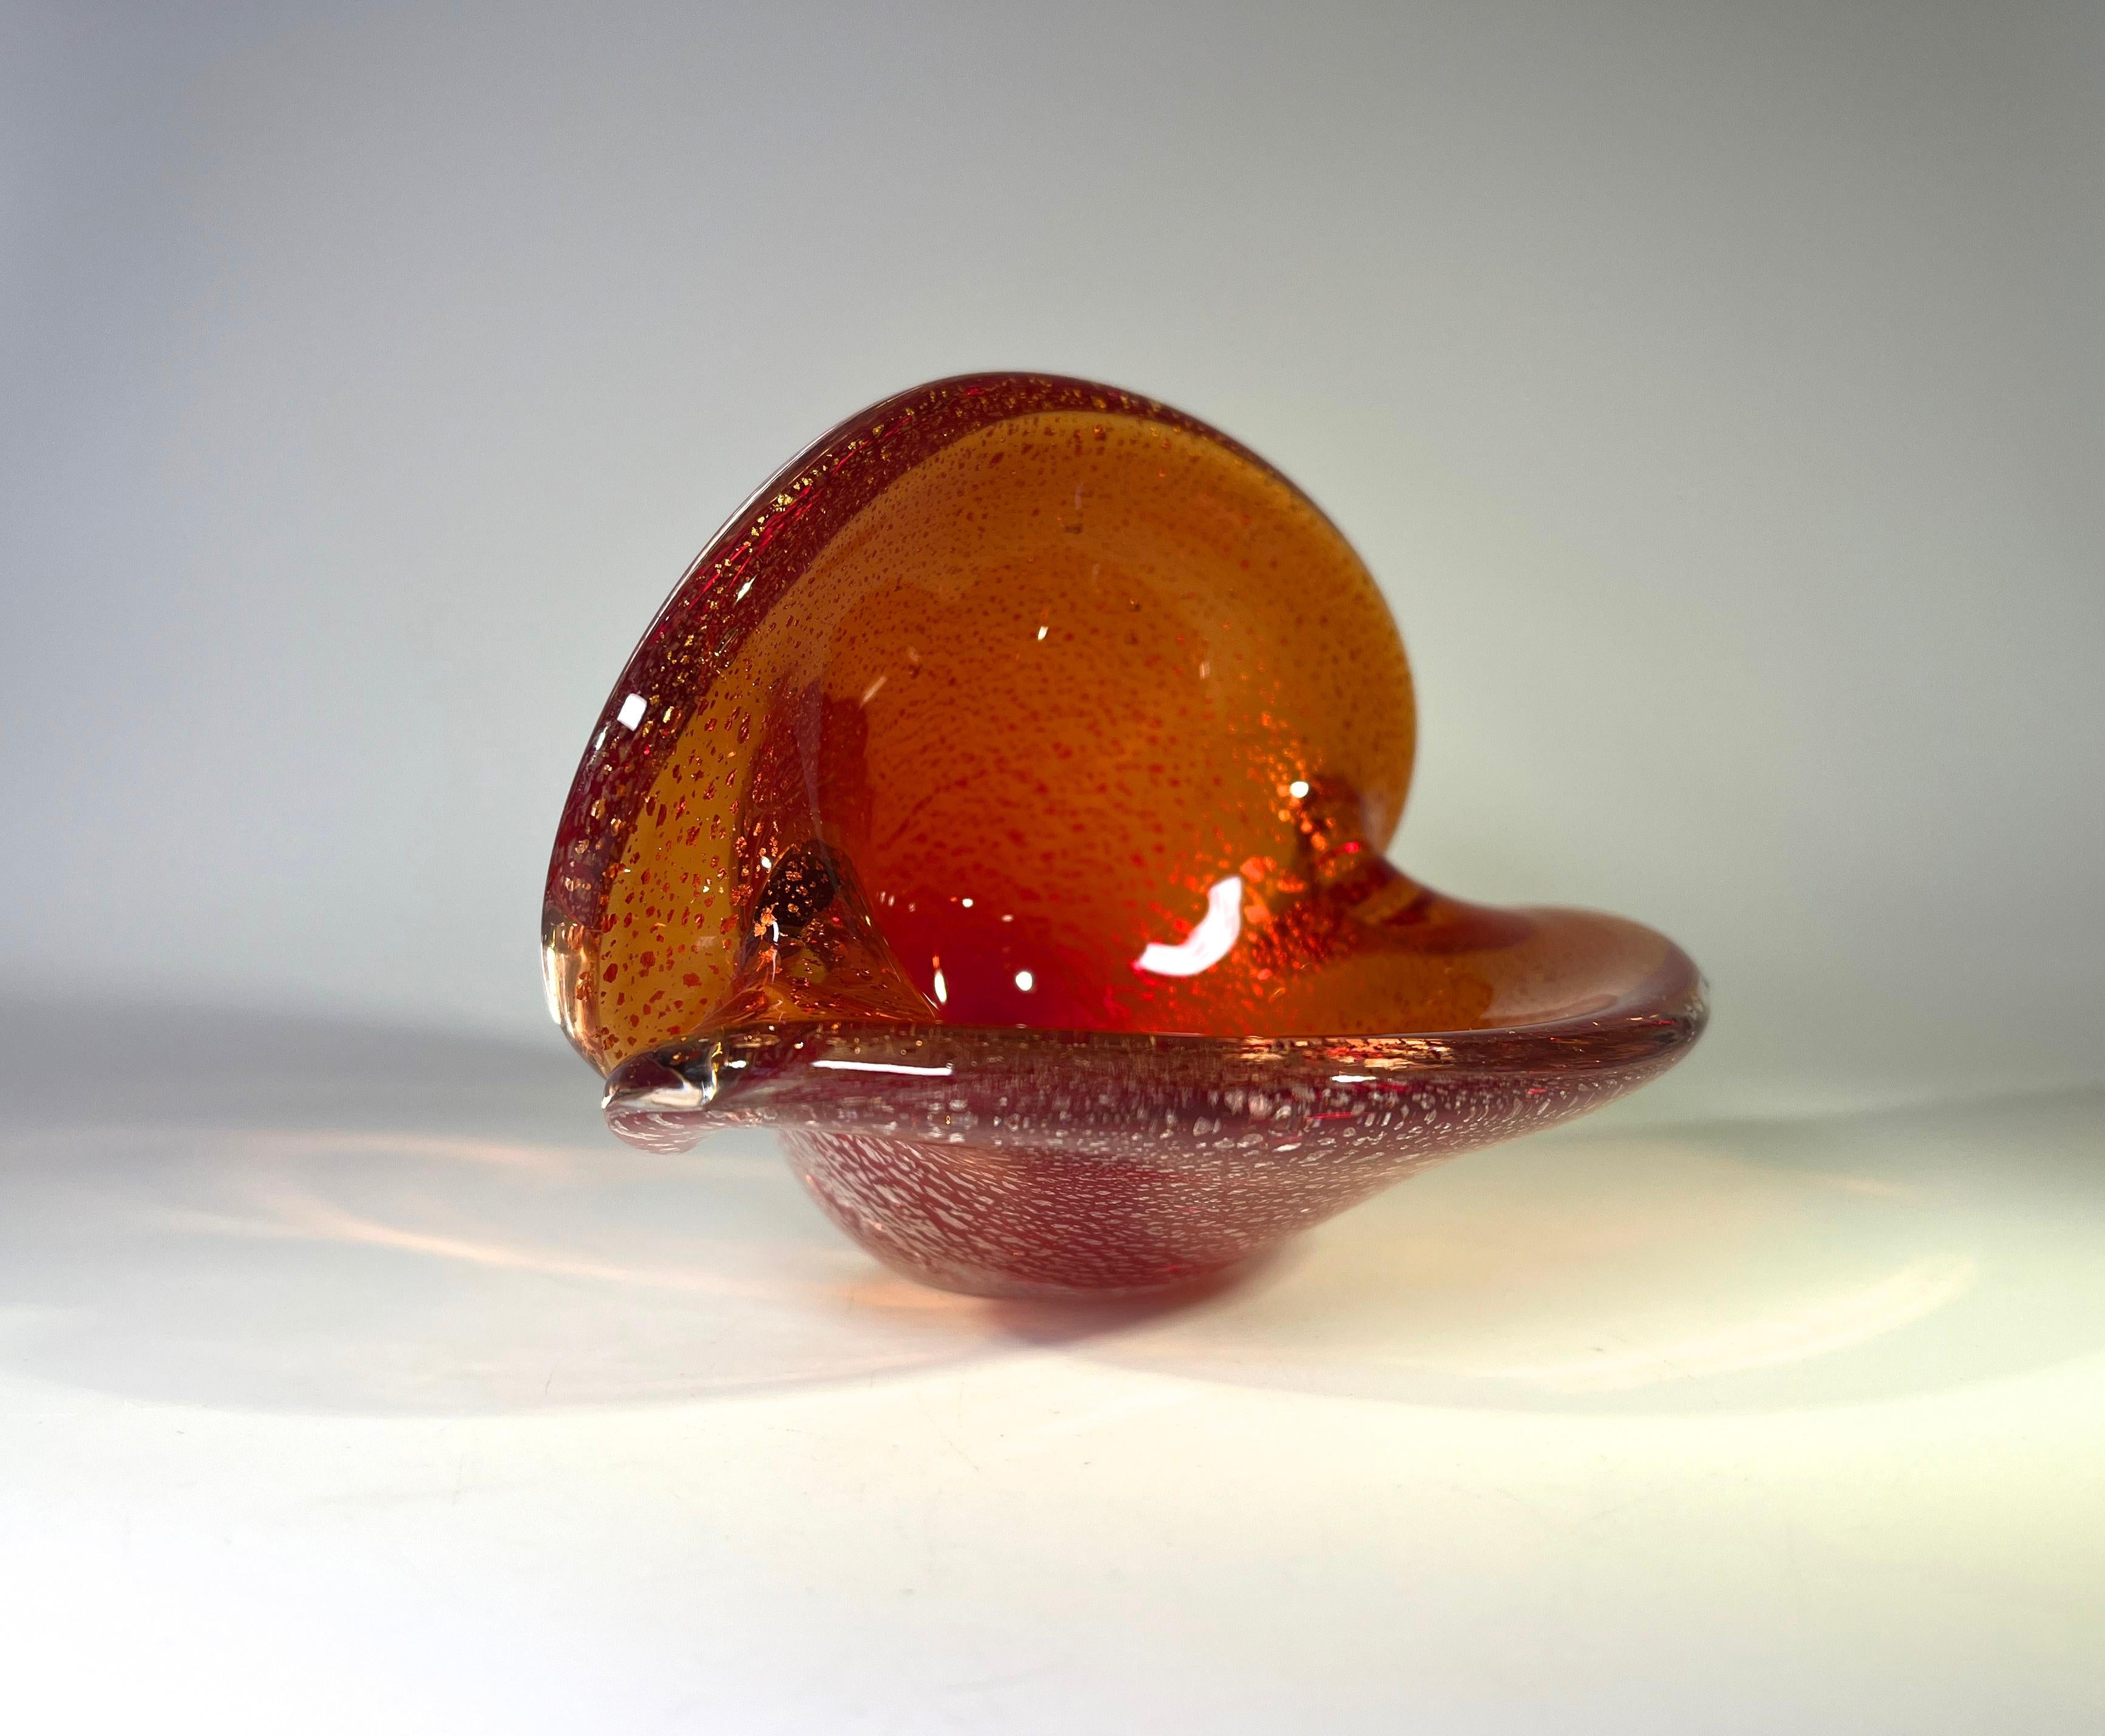 Italian Luxuriant Liquid Amber And Silver Shards, Murano Glass Clam Shell Vase For Sale